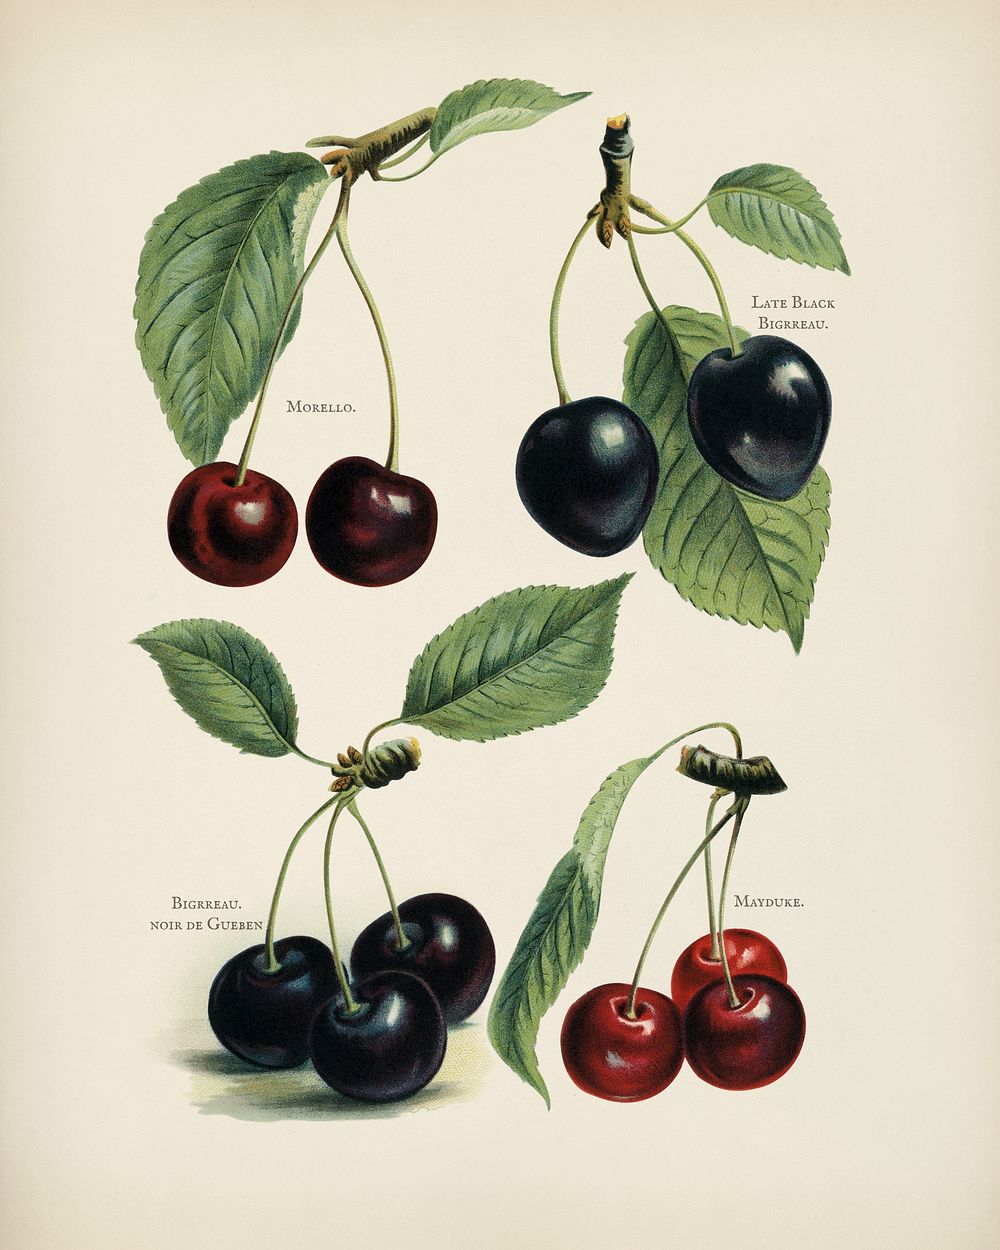 Vintage illustration of cherry digitally enhanced from our own vintage edition of The Fruit Grower's Guide (1891) by John…